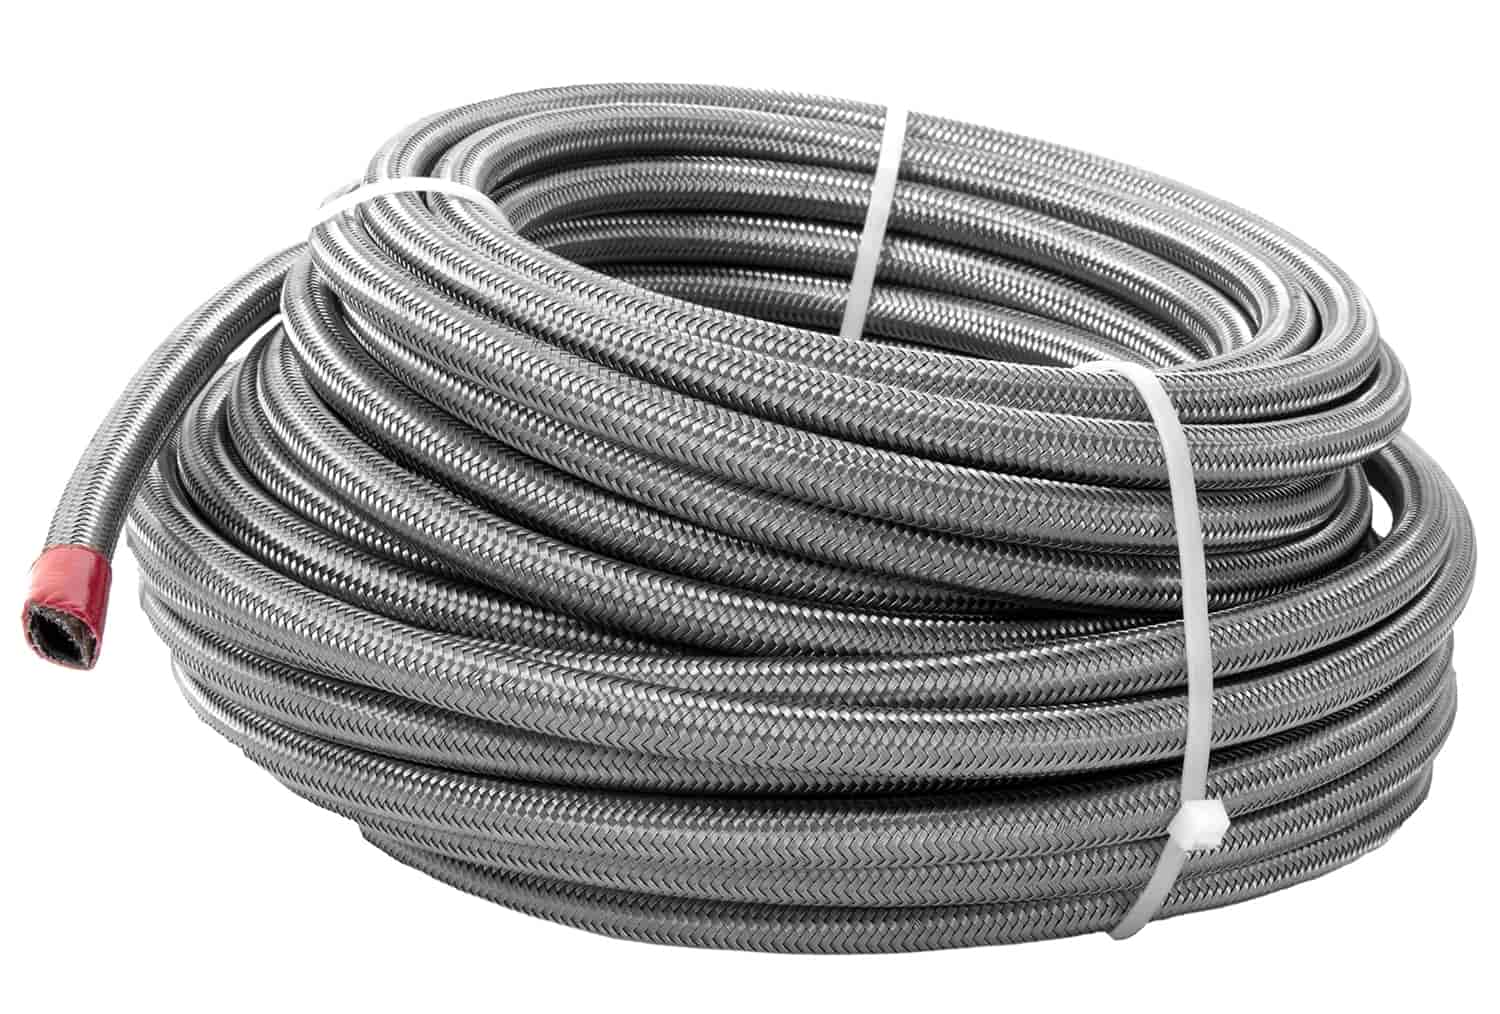 Braided Stainless Steel PTFE Fuel Hose -10 AN x 8 ft